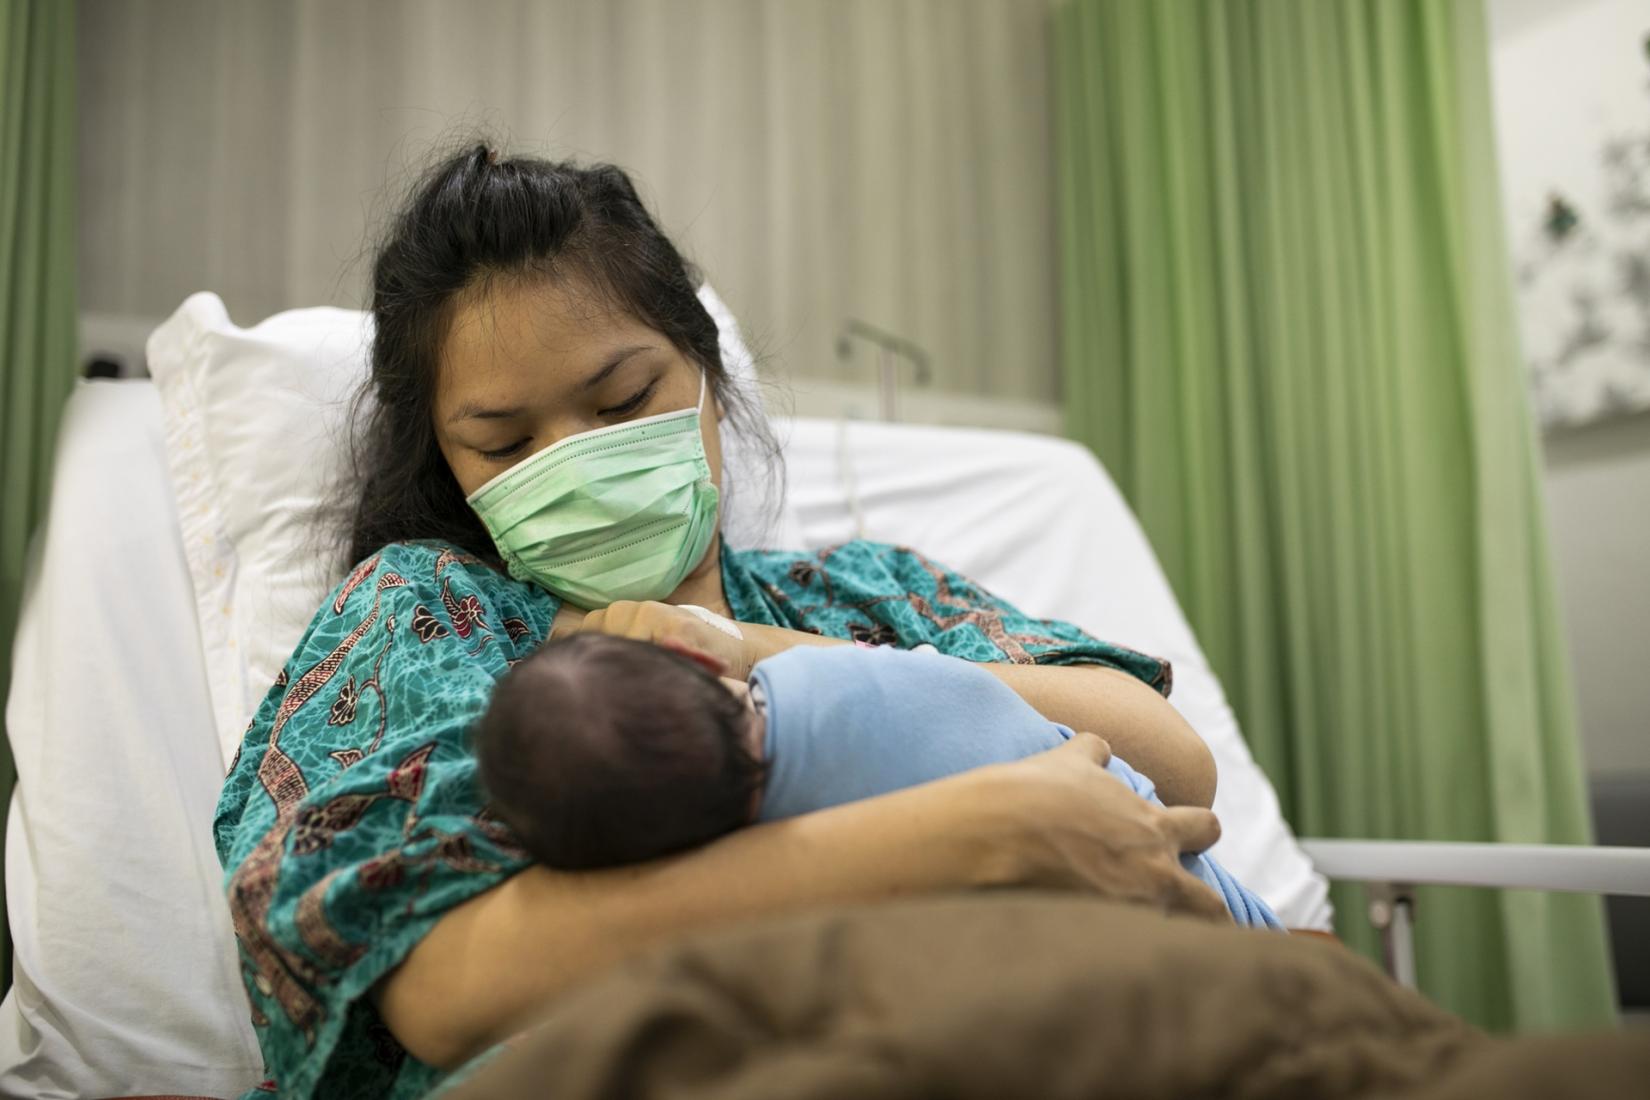 Mother feeding her newborn baby in the hospital